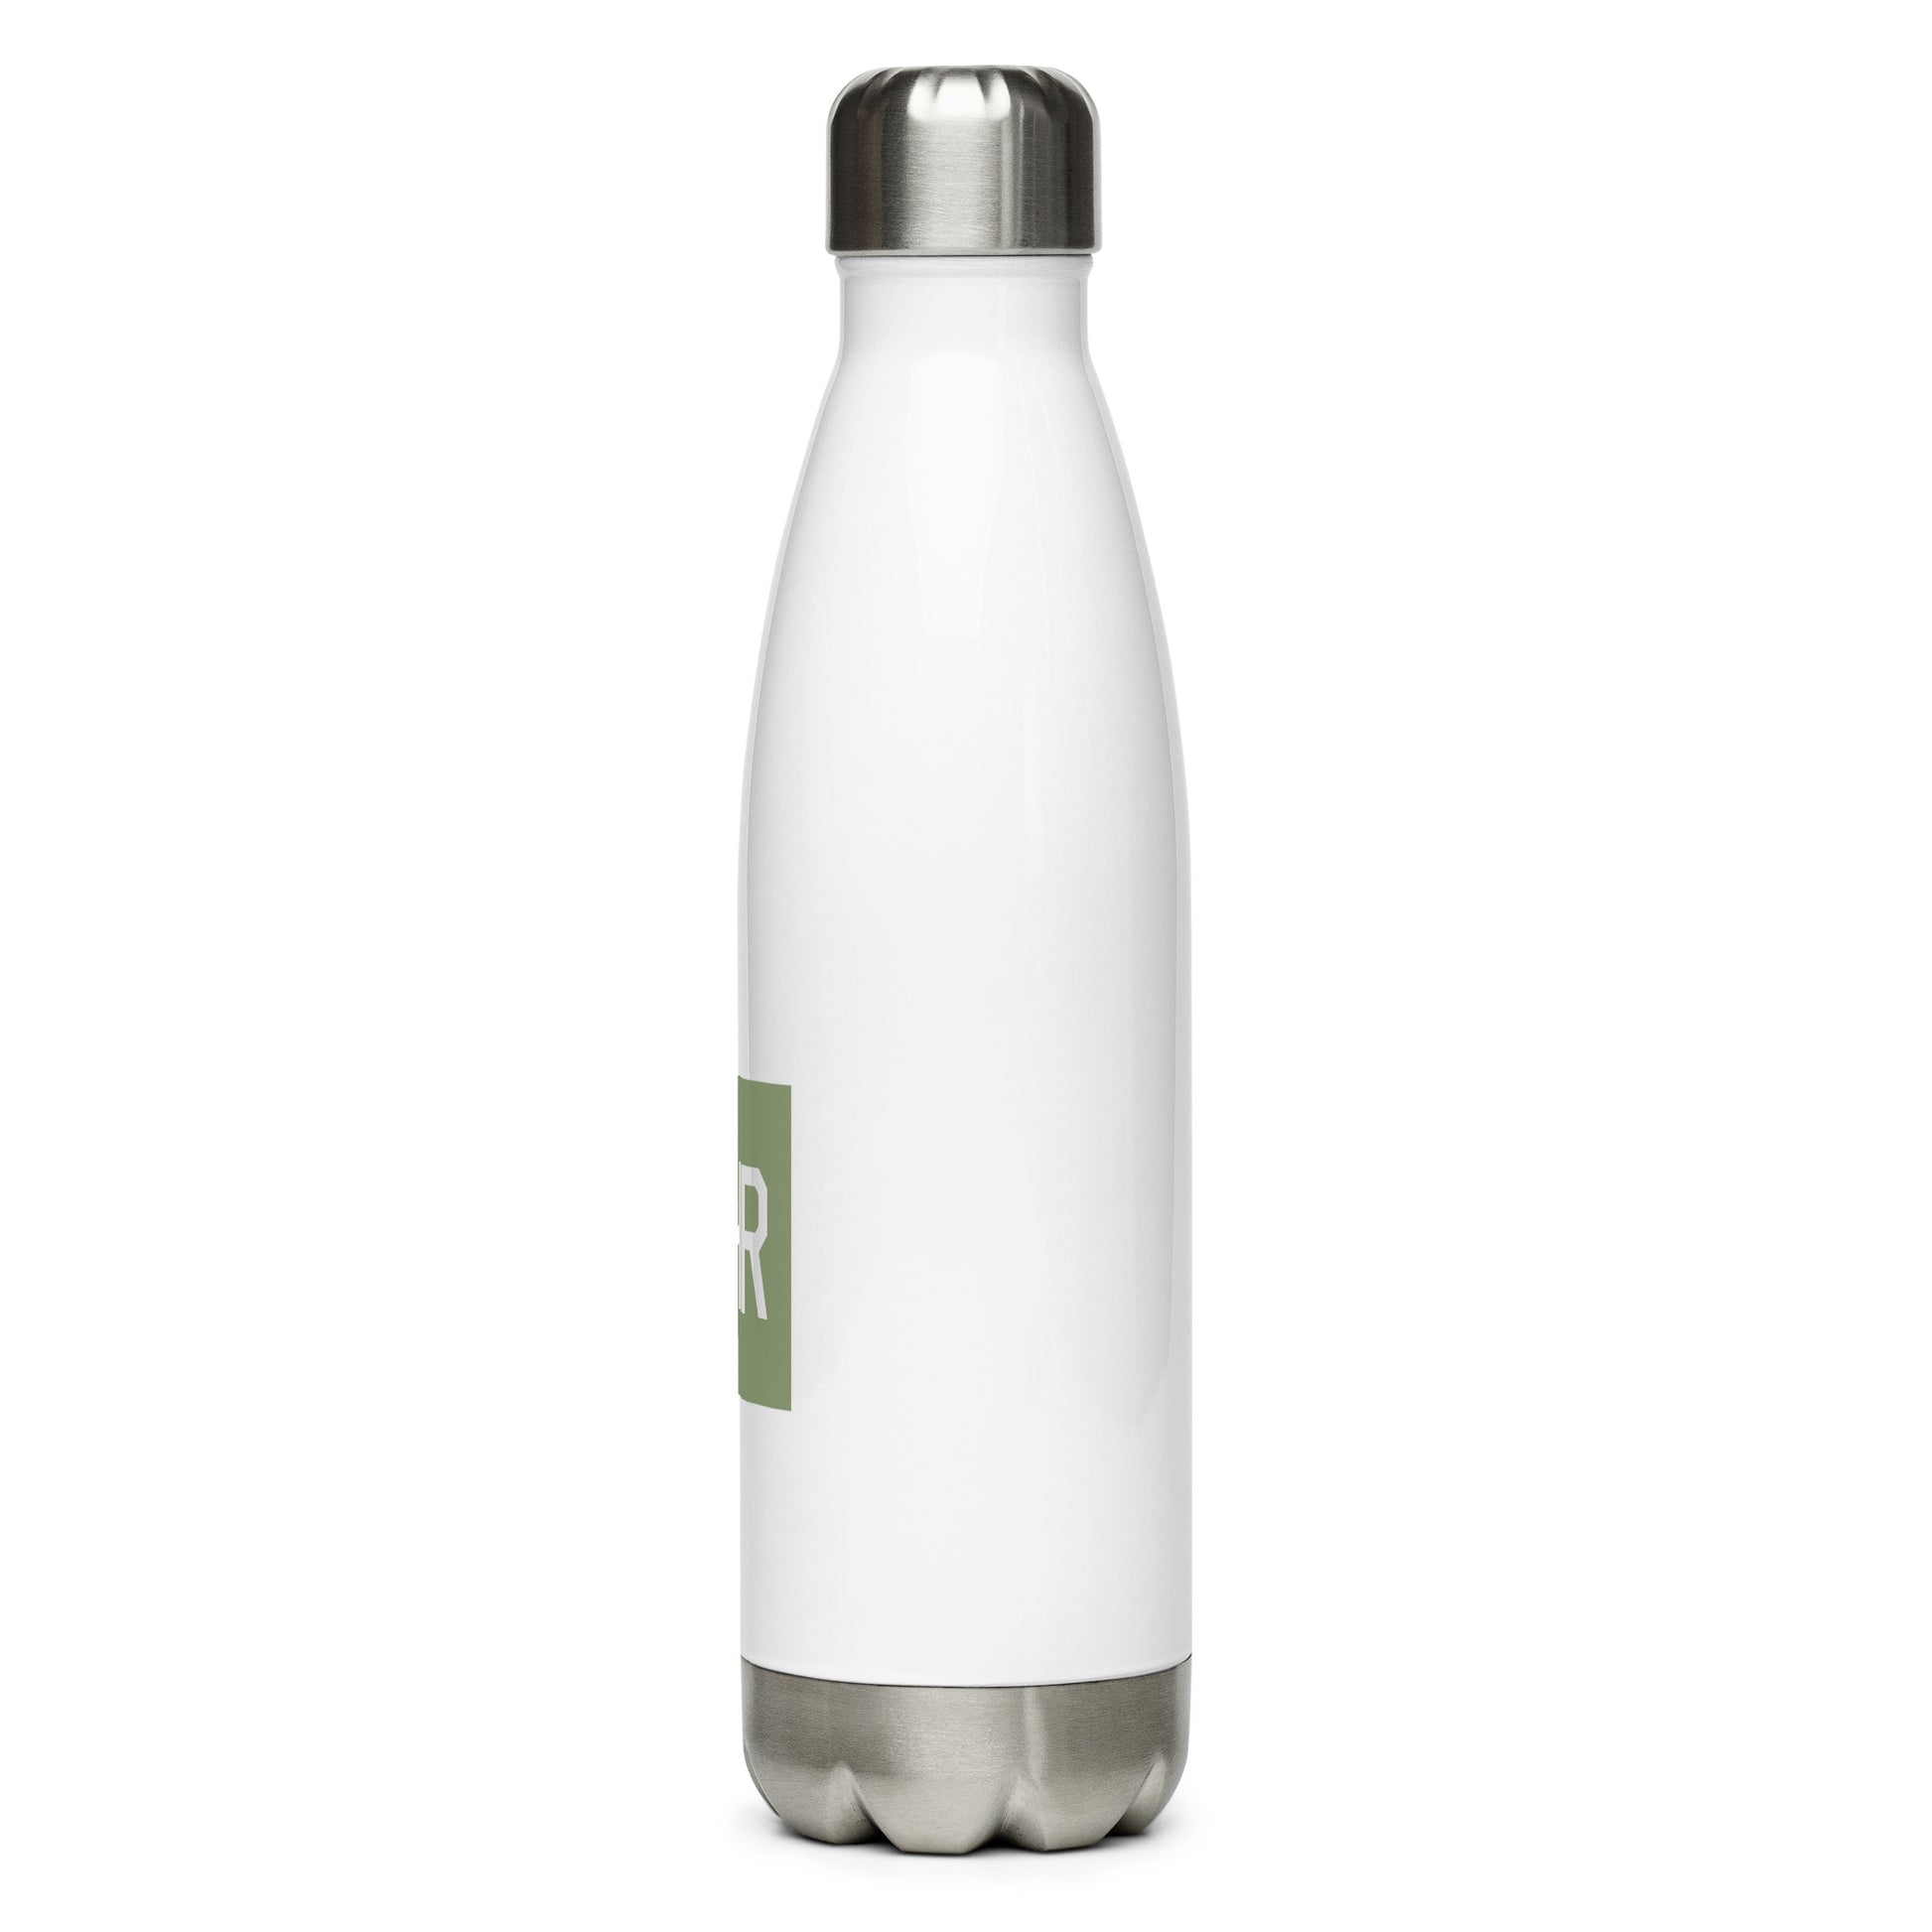 Aviation Gift Water Bottle - Camo Green • LHR London • YHM Designs - Image 08